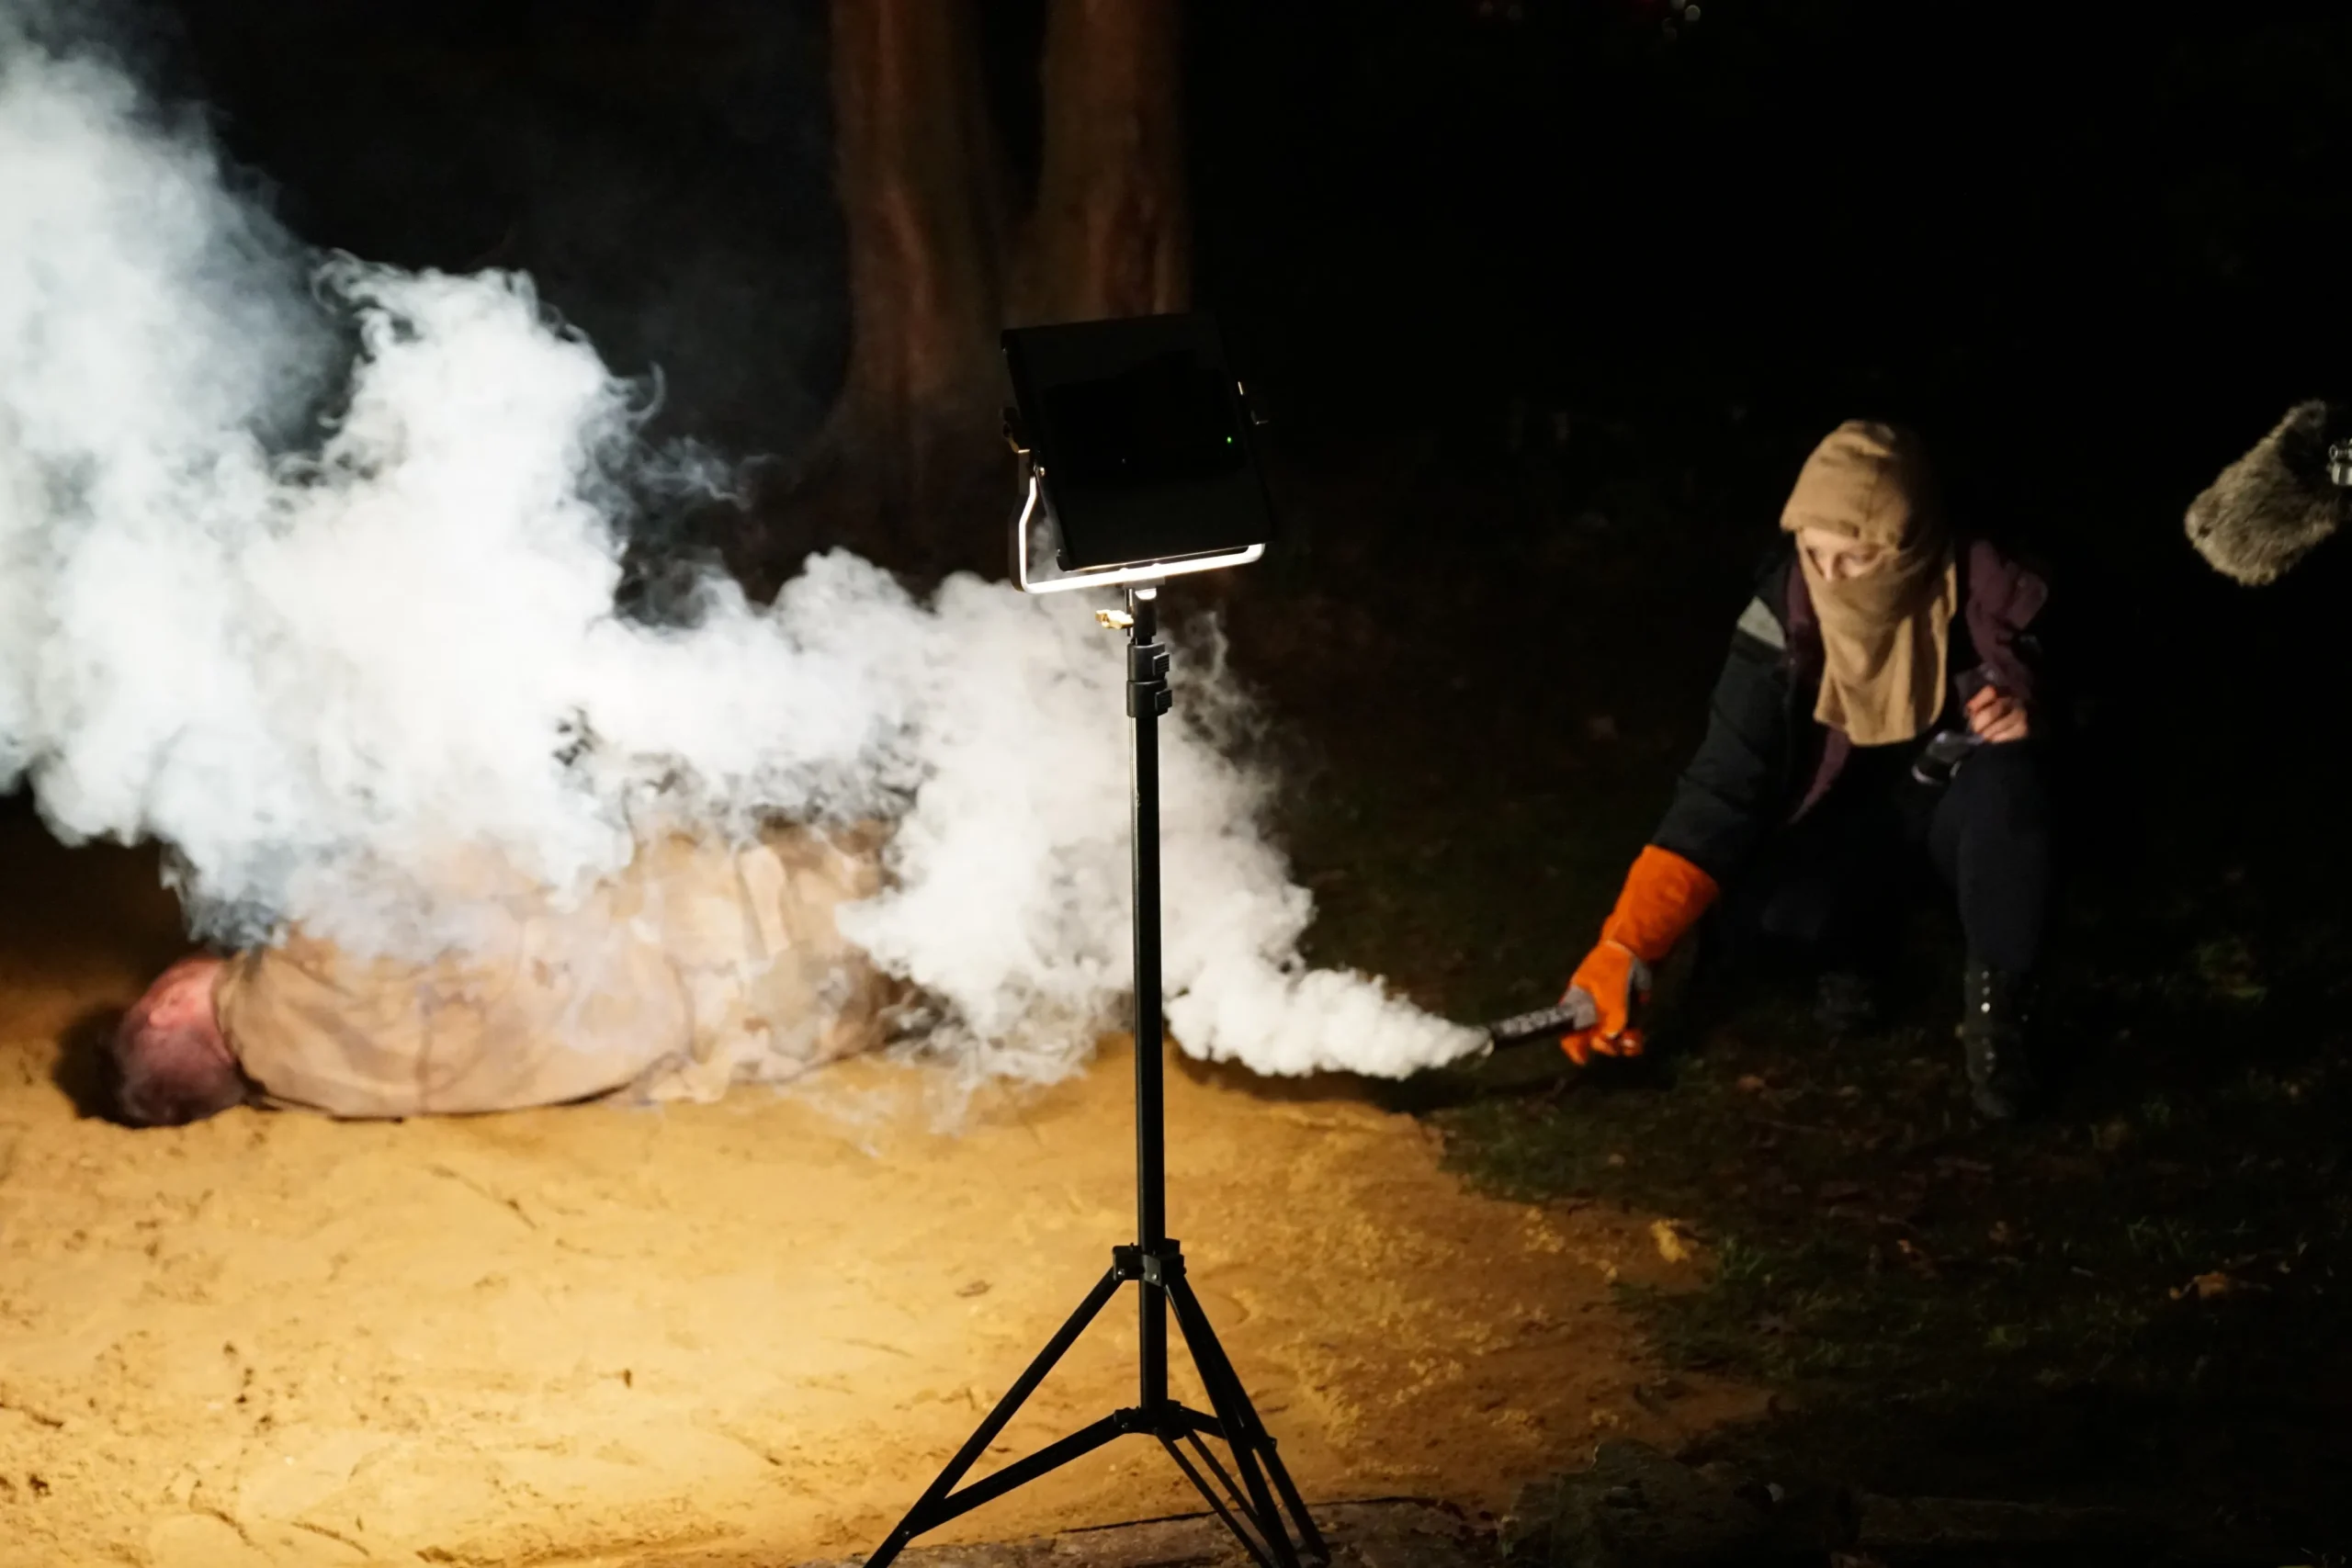 A person cover up while using a smoke grande, while a person on the ground is enveloped in smoke from above.